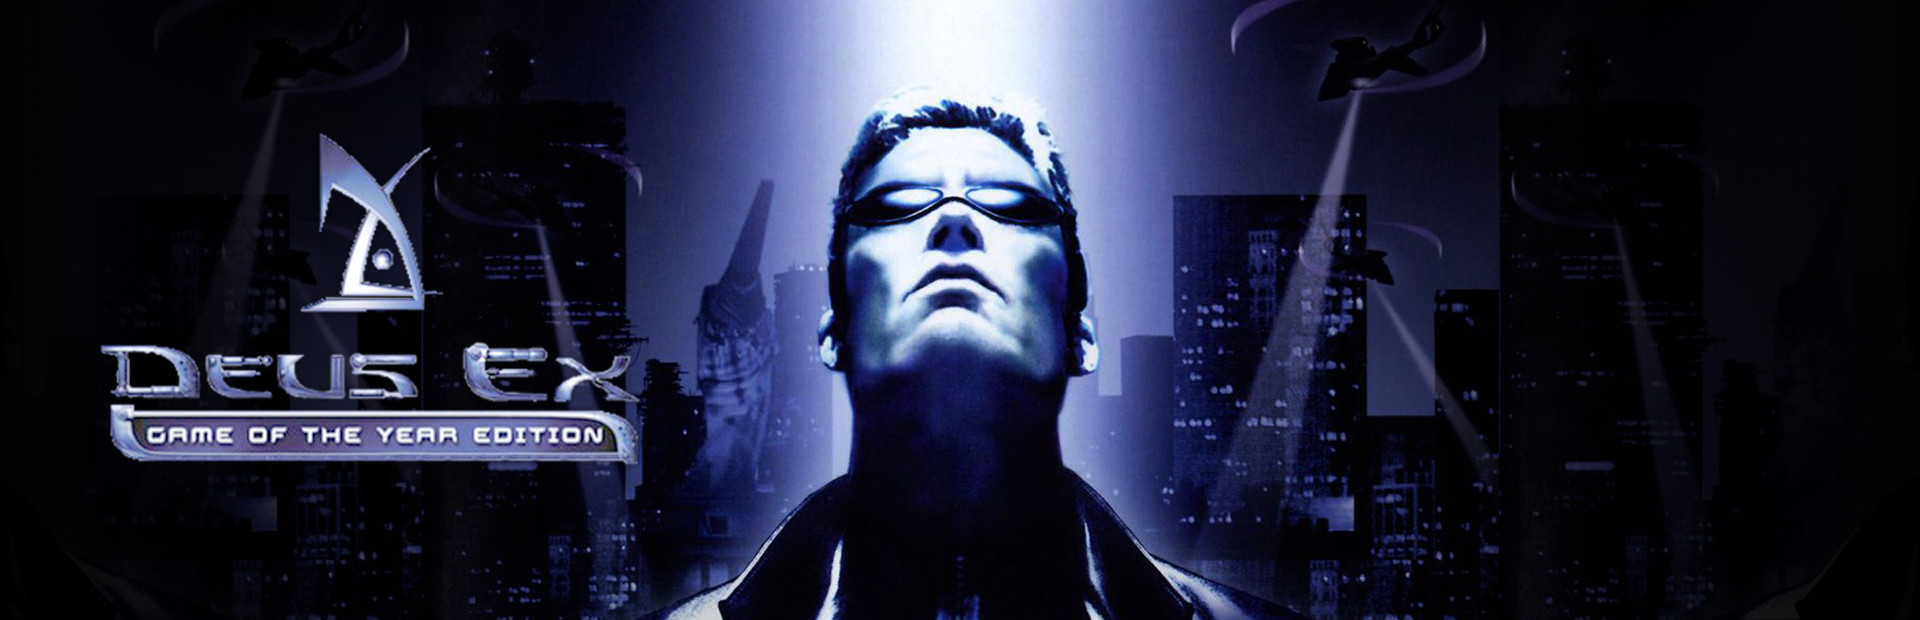 Deus Ex: Game of the Year Edition cover image